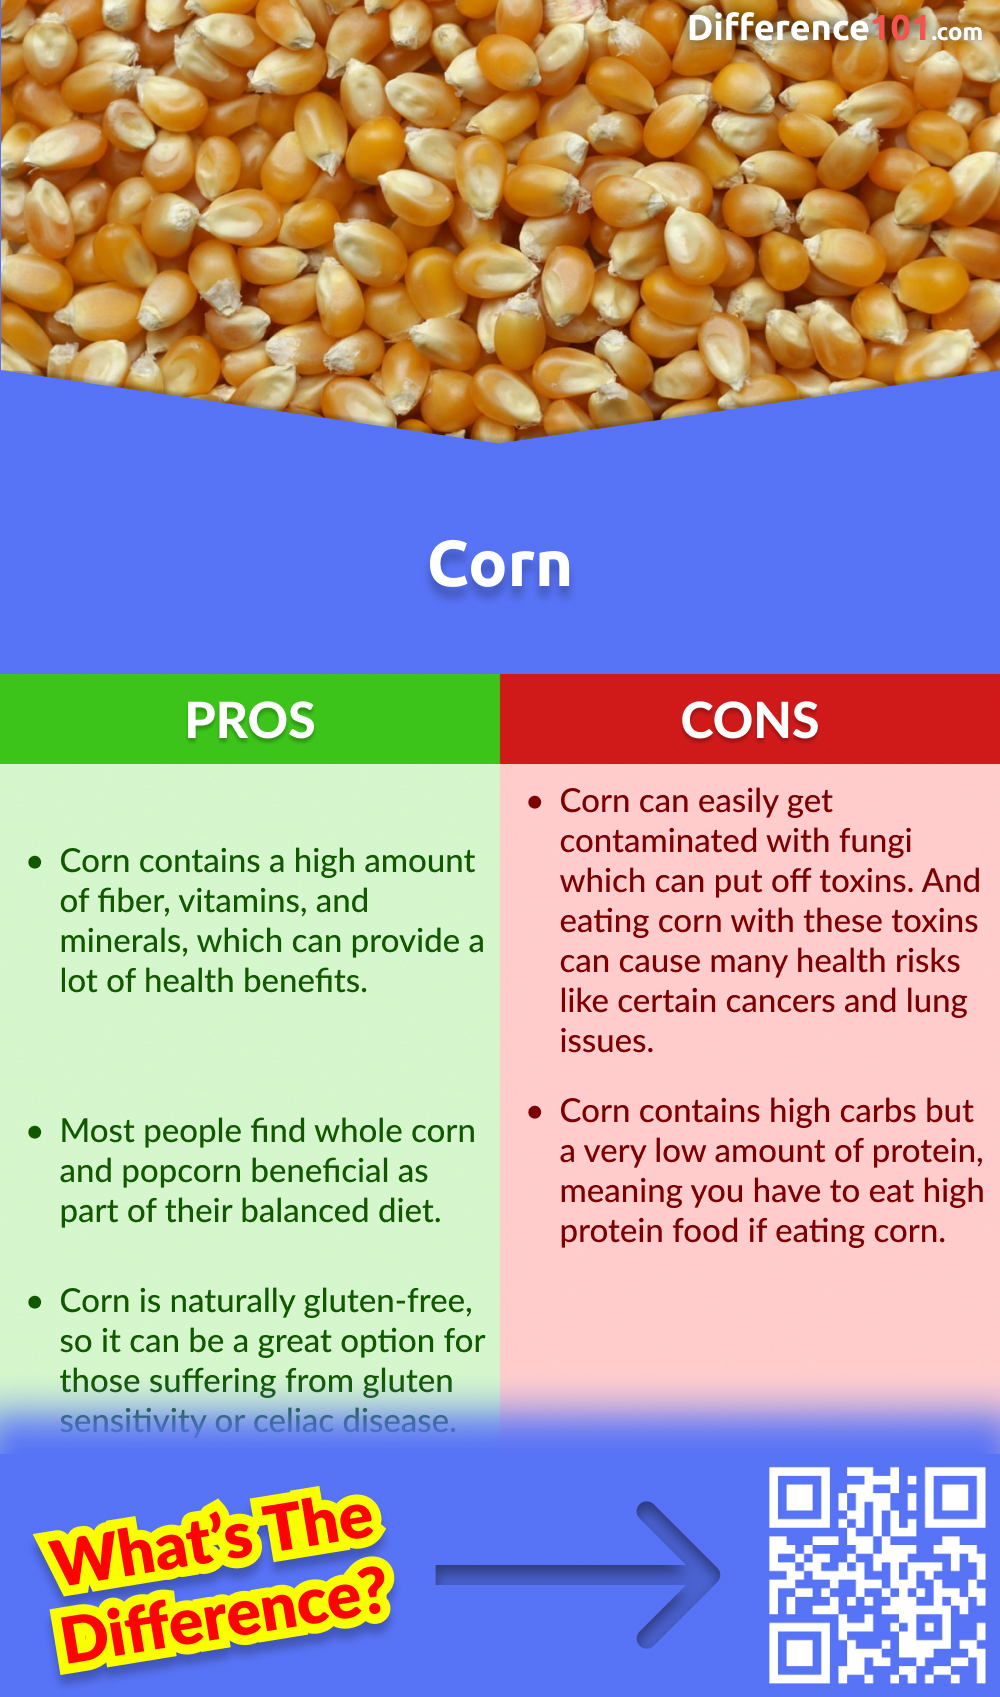 Corn Pros and Cons